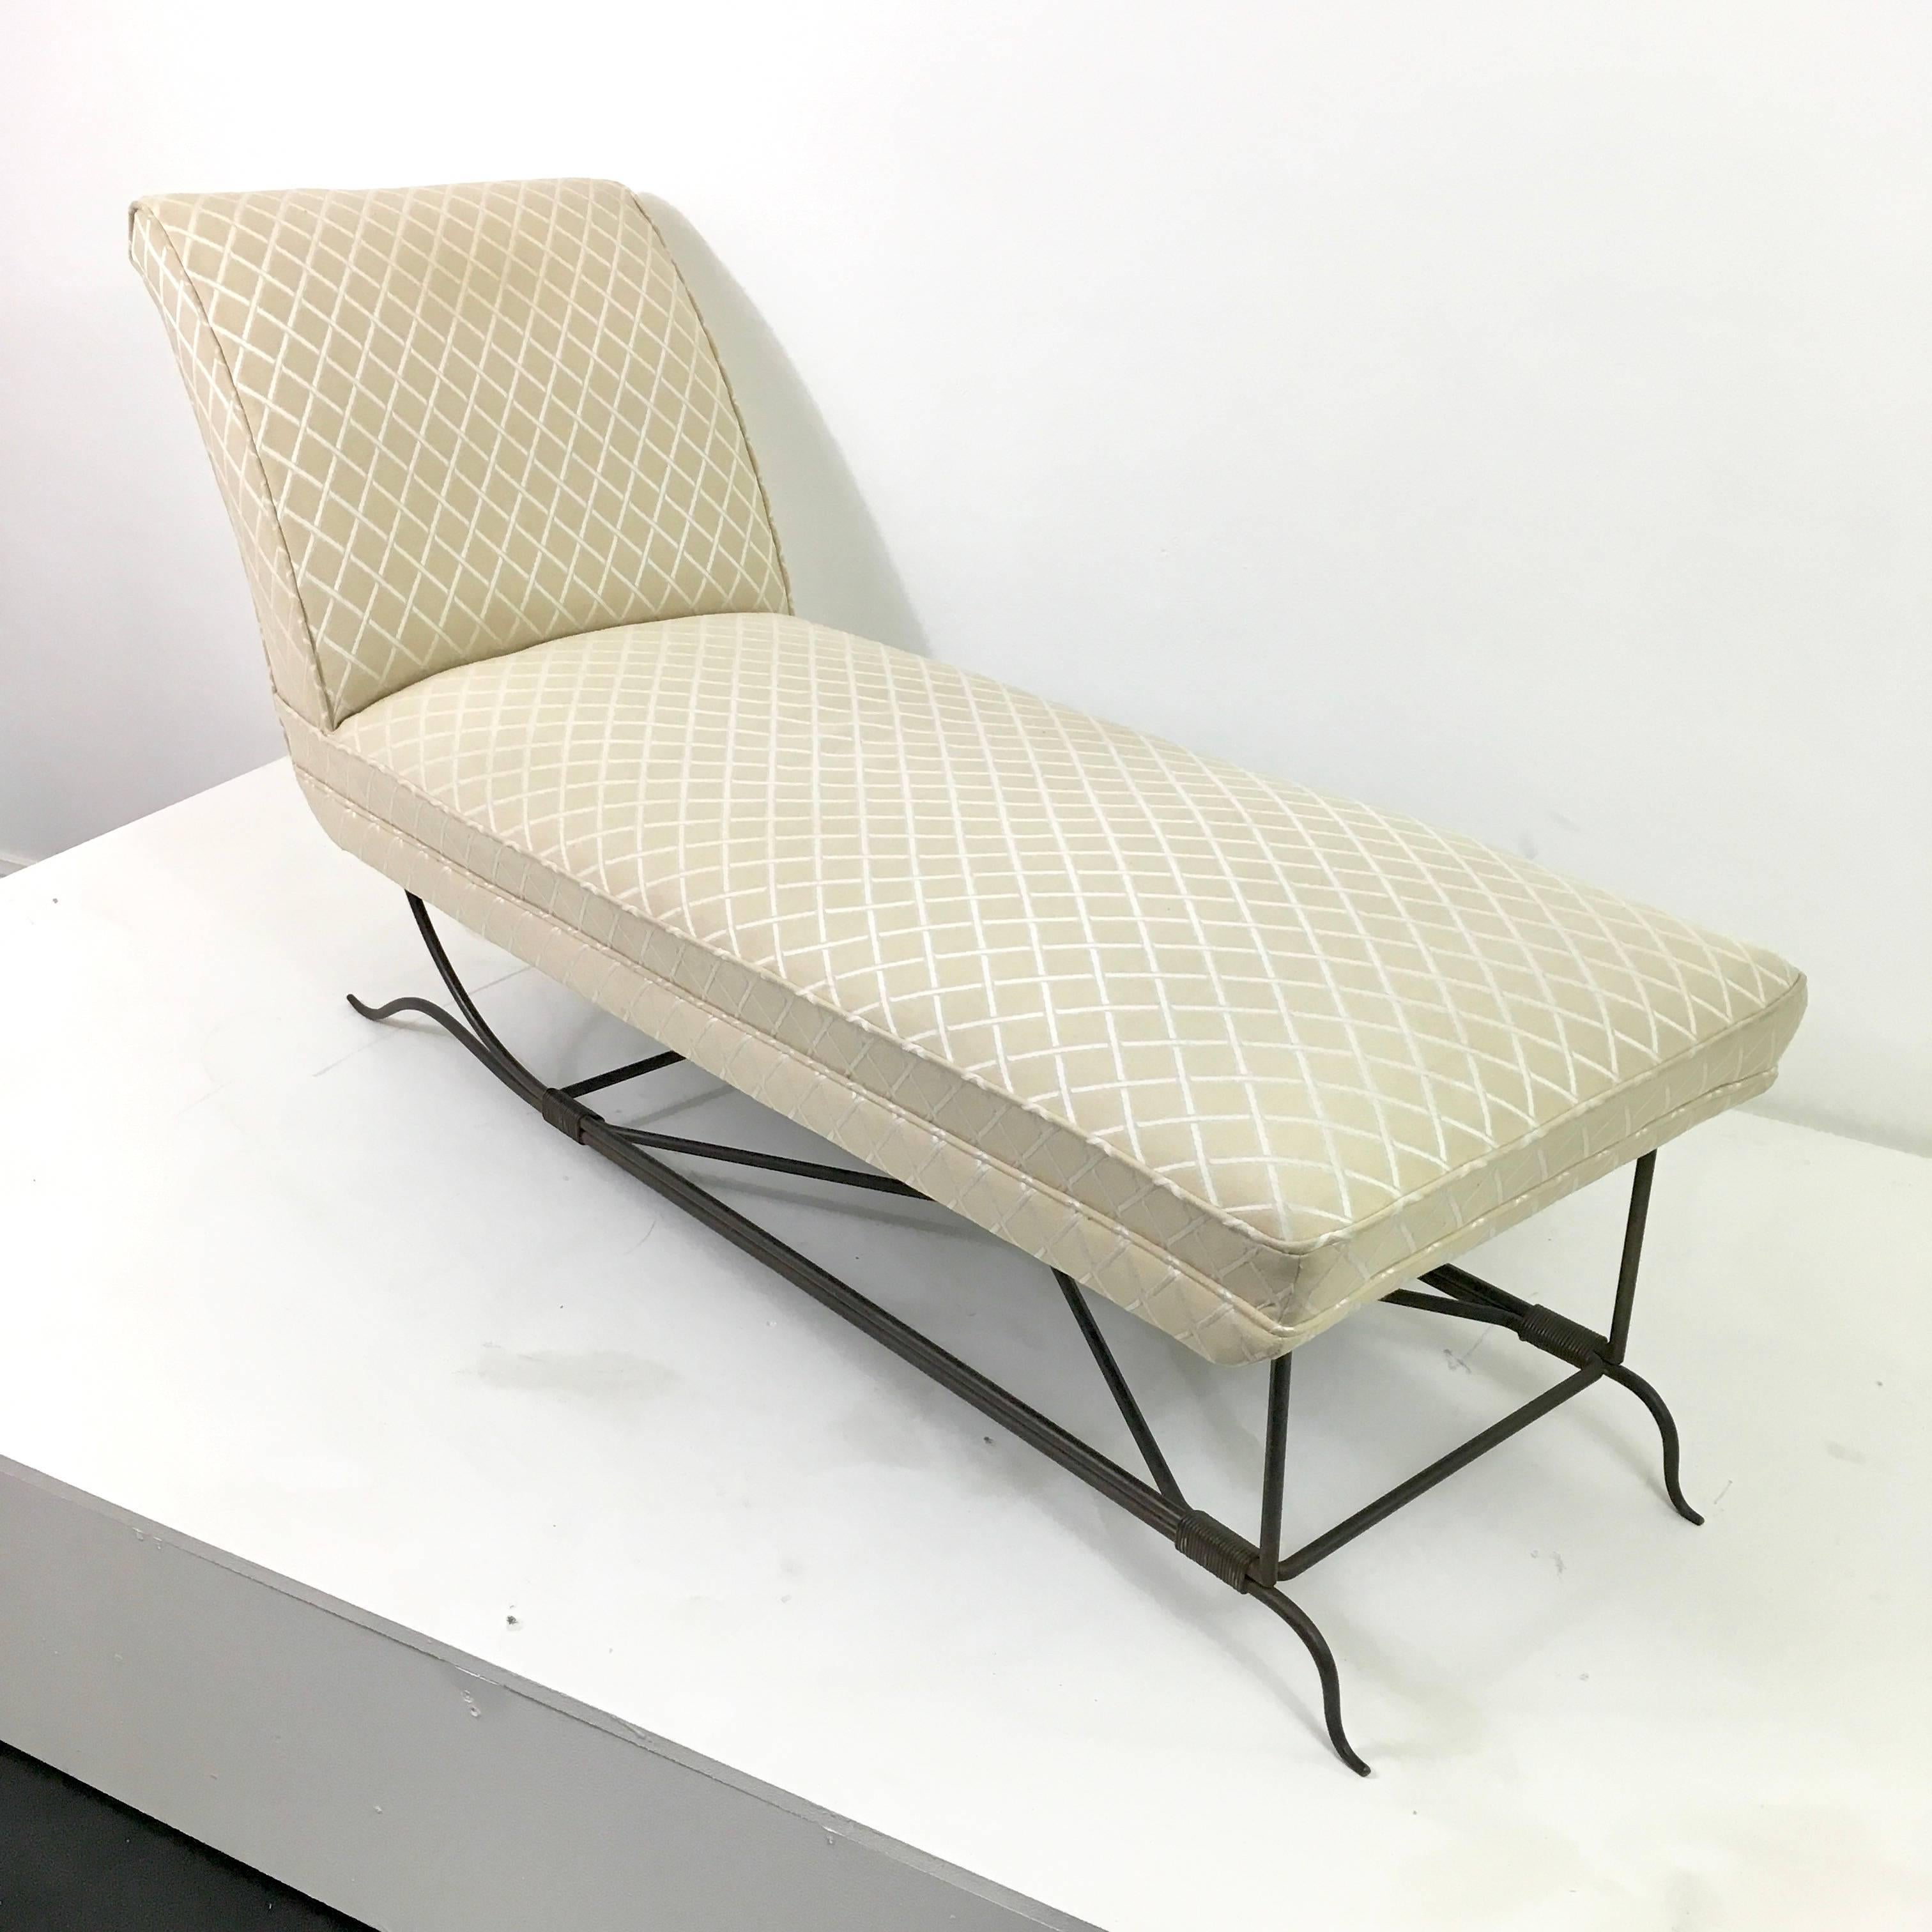 A rare chaise Longue by Colette Gueden. Documented.